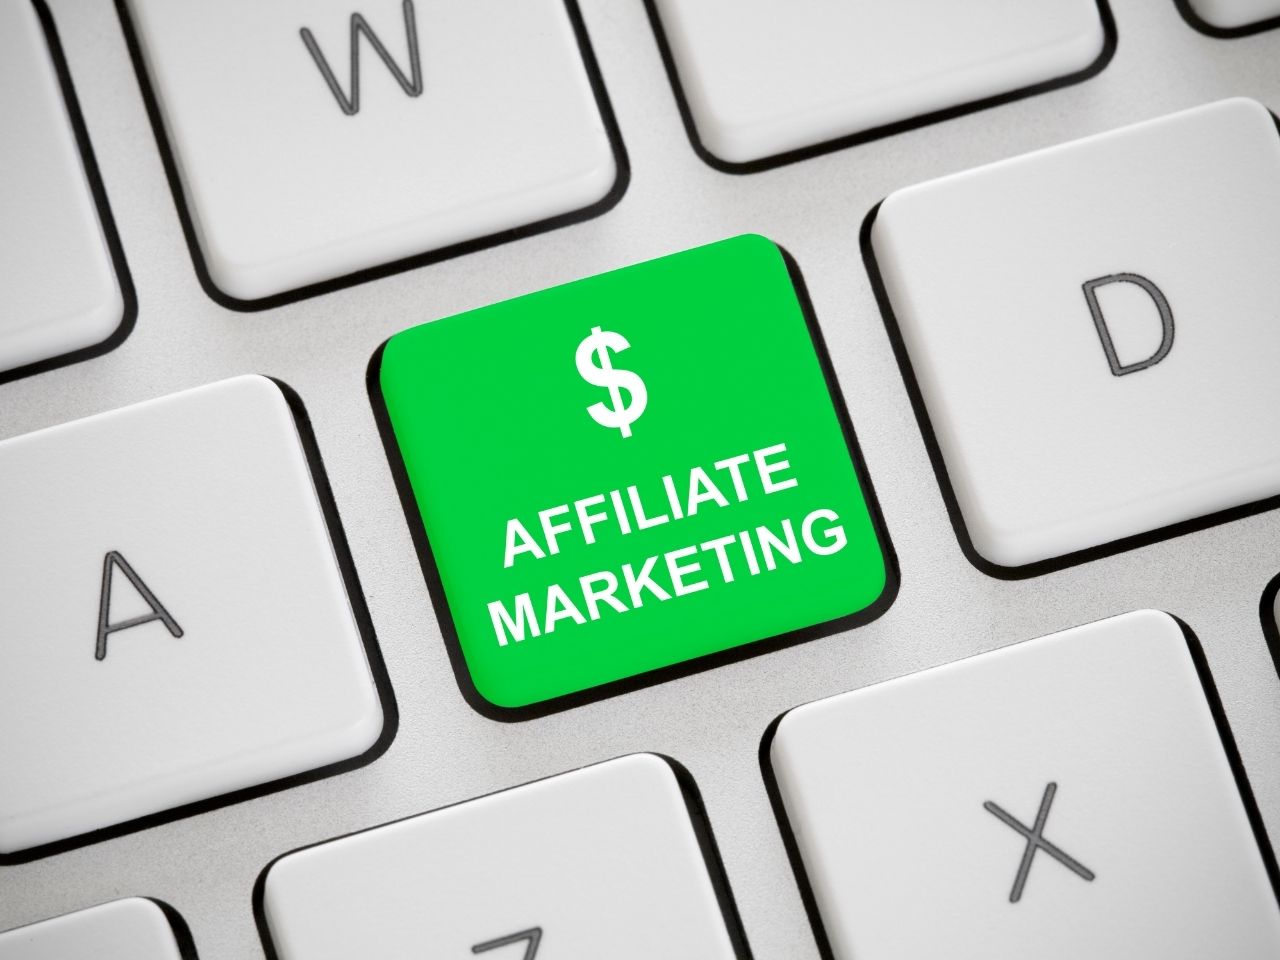 Green key with affiliate marketing